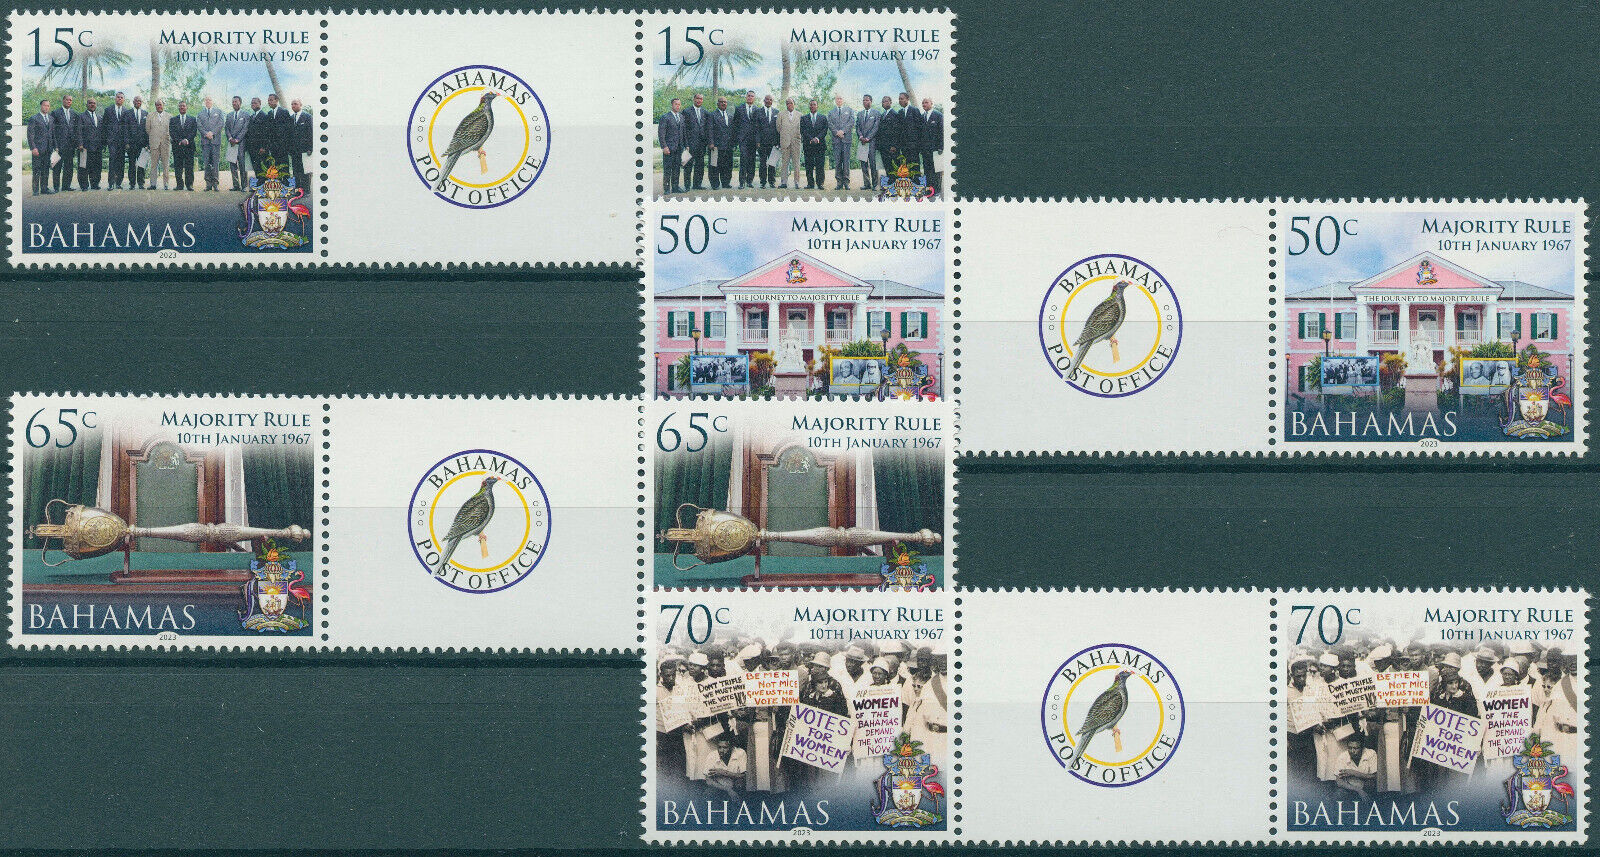 Bahamas 2022 MNH Historical Events Stamps Majority Rule 4v Set in Gutter Pairs